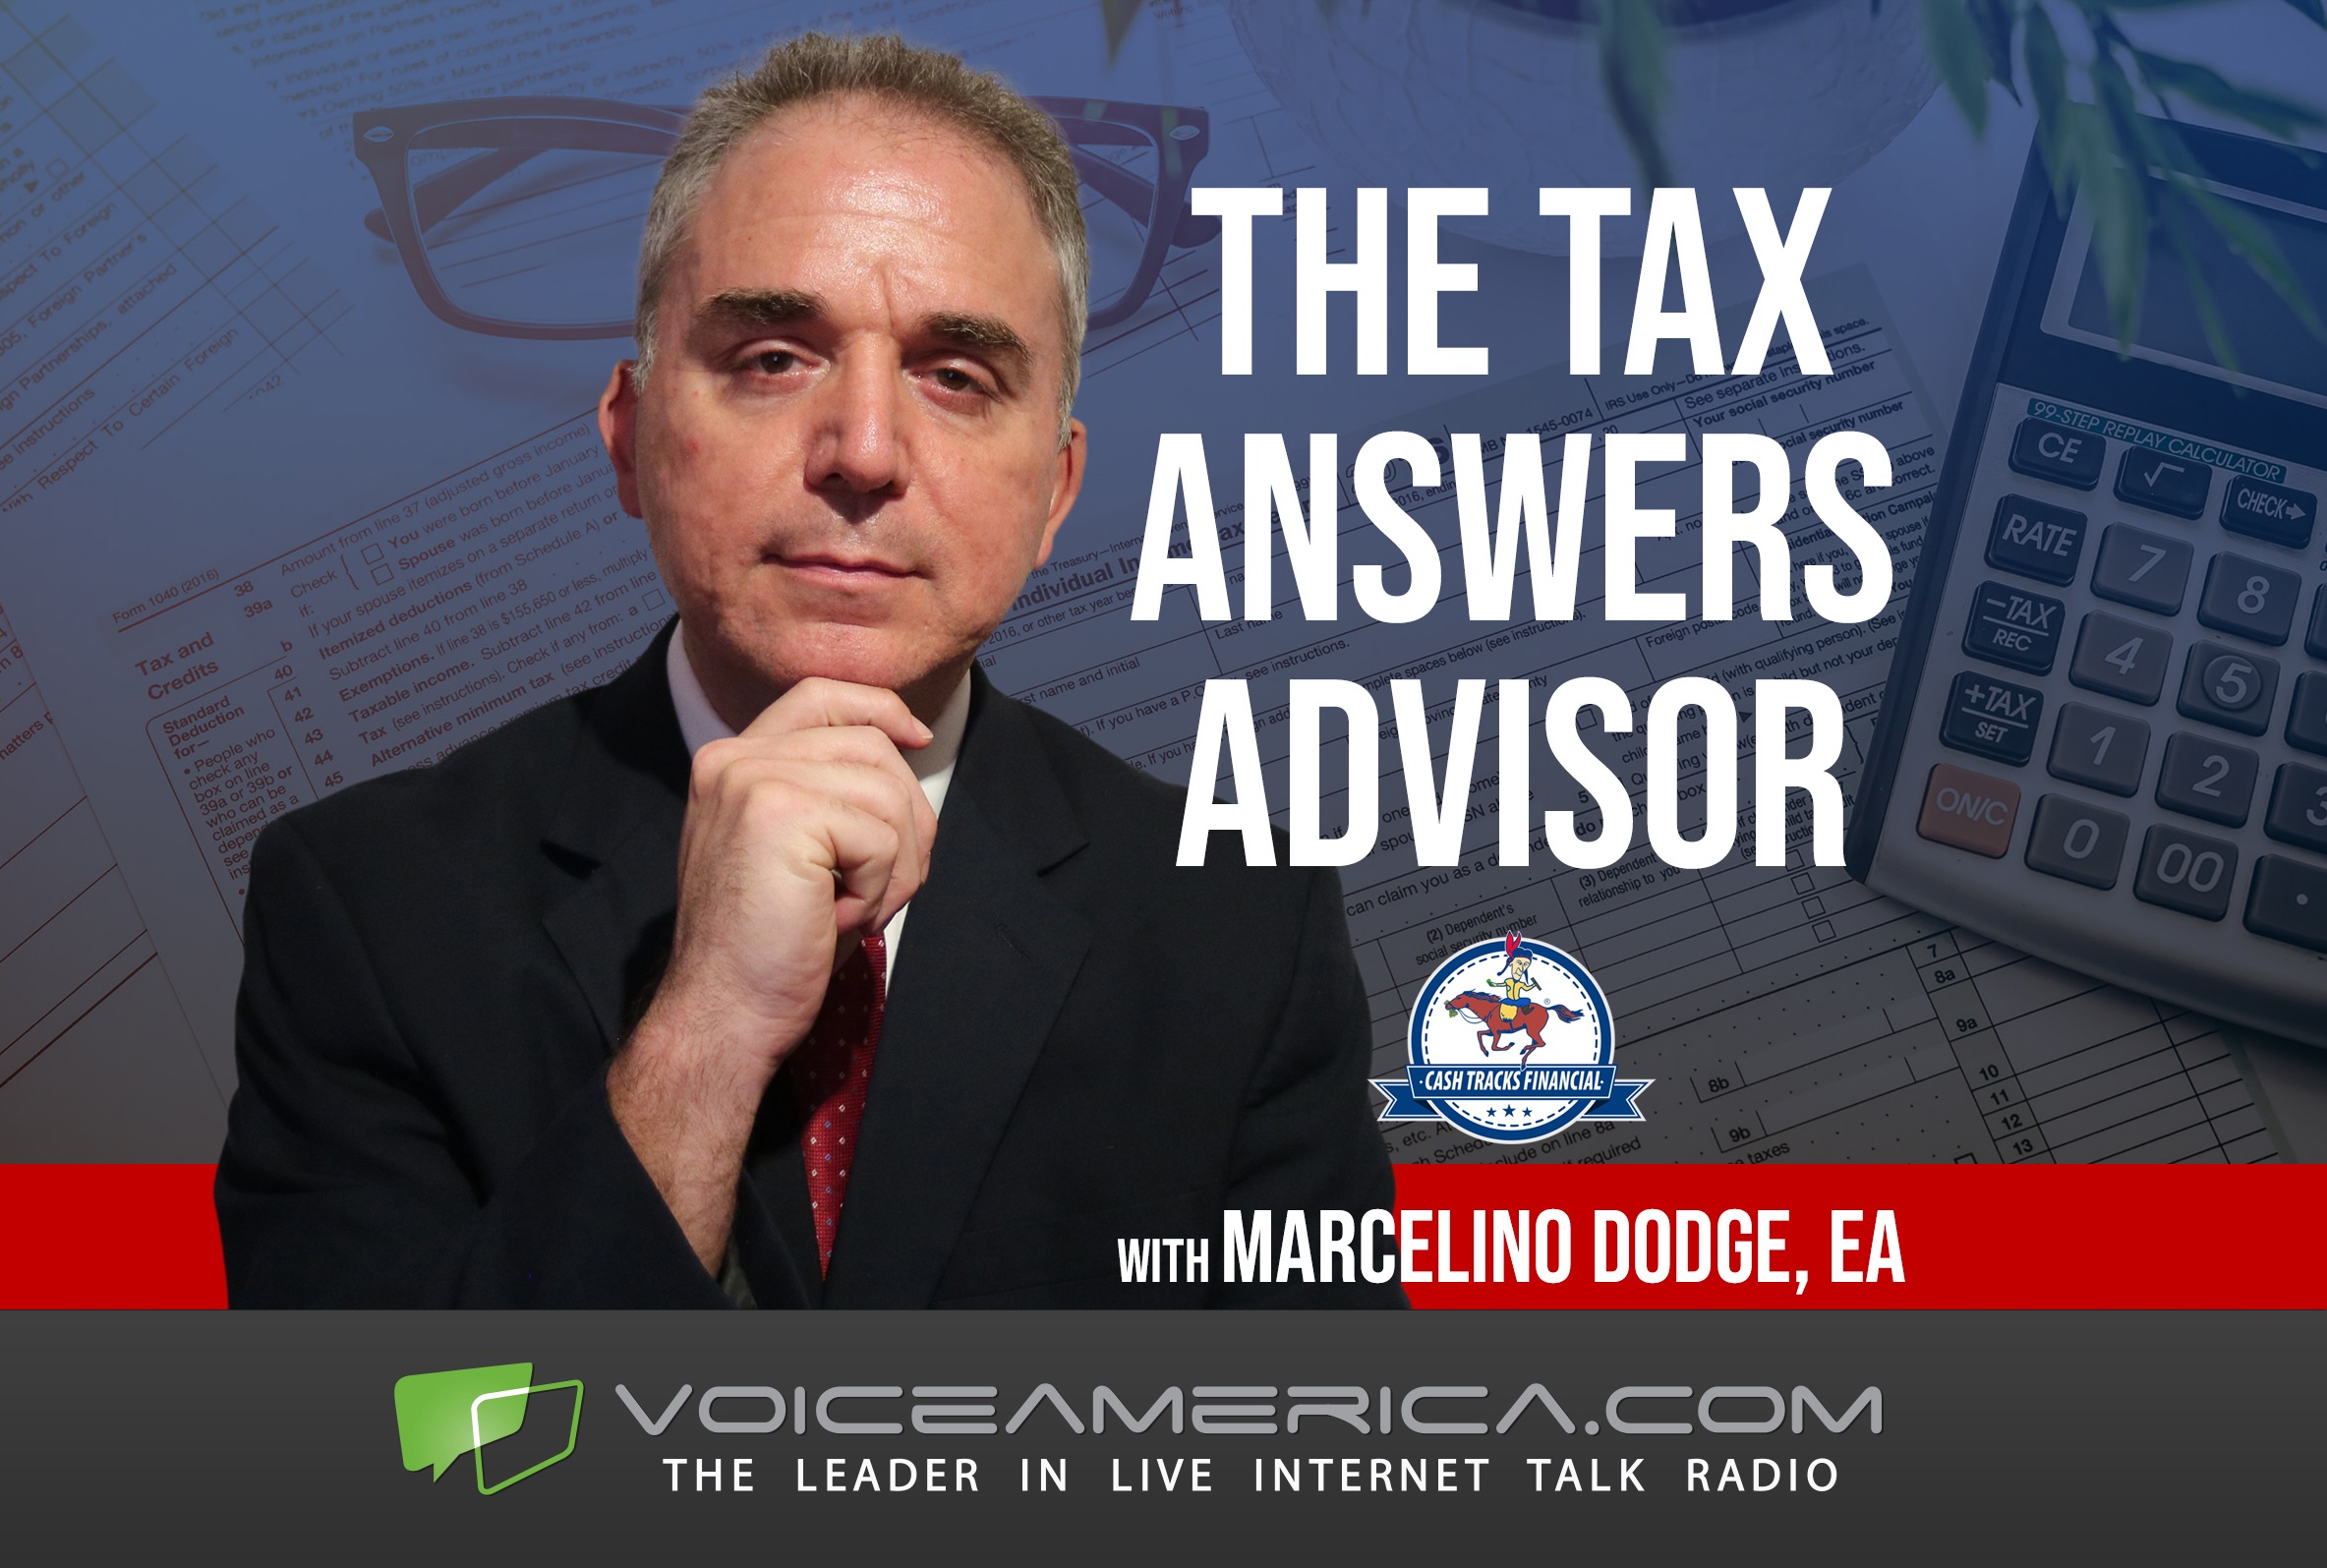 Welcome to The Tax Answers Advisor